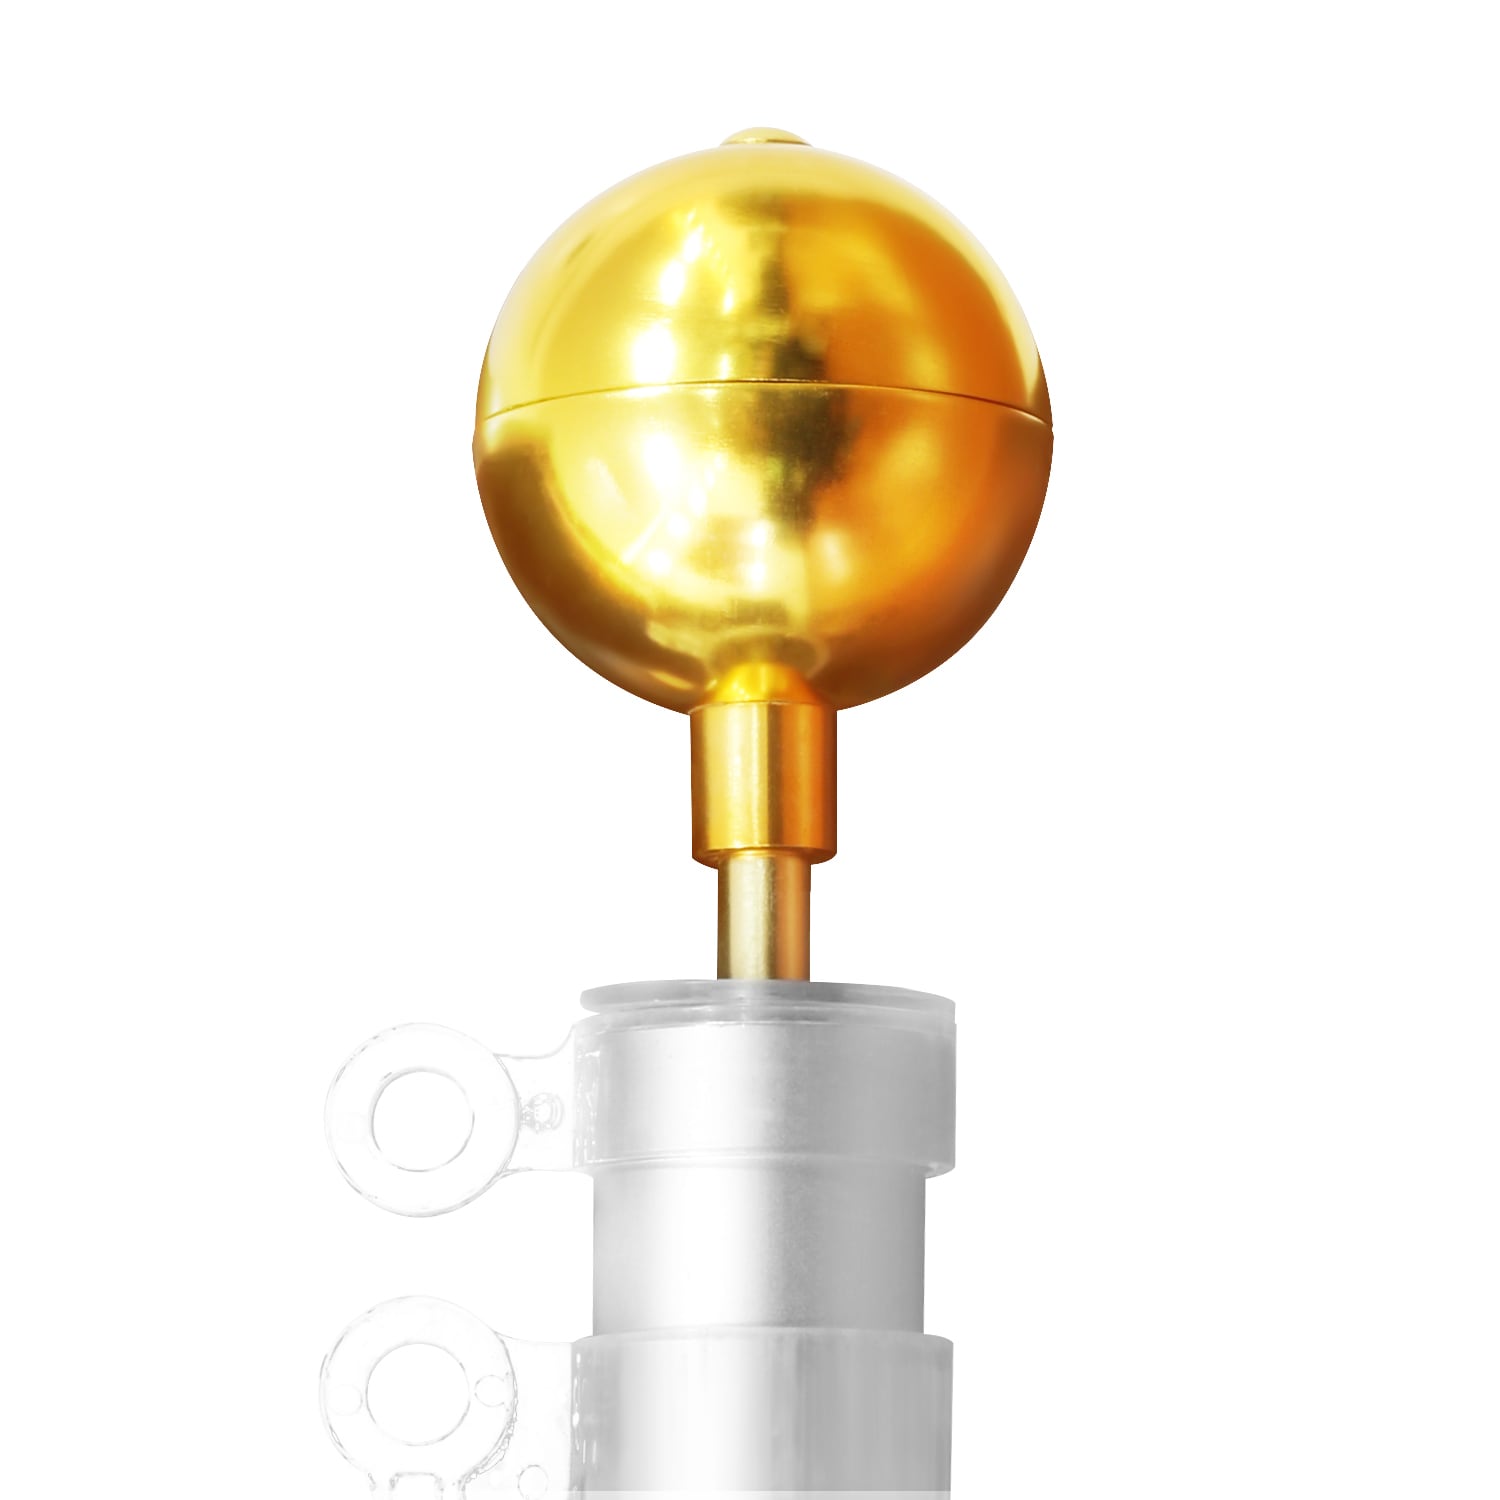 3"INCH GOLD ANODIZED ALUMINUM FLAGPOLE BALL ORNAMENT FLAG FINIAL POLE TOPPER